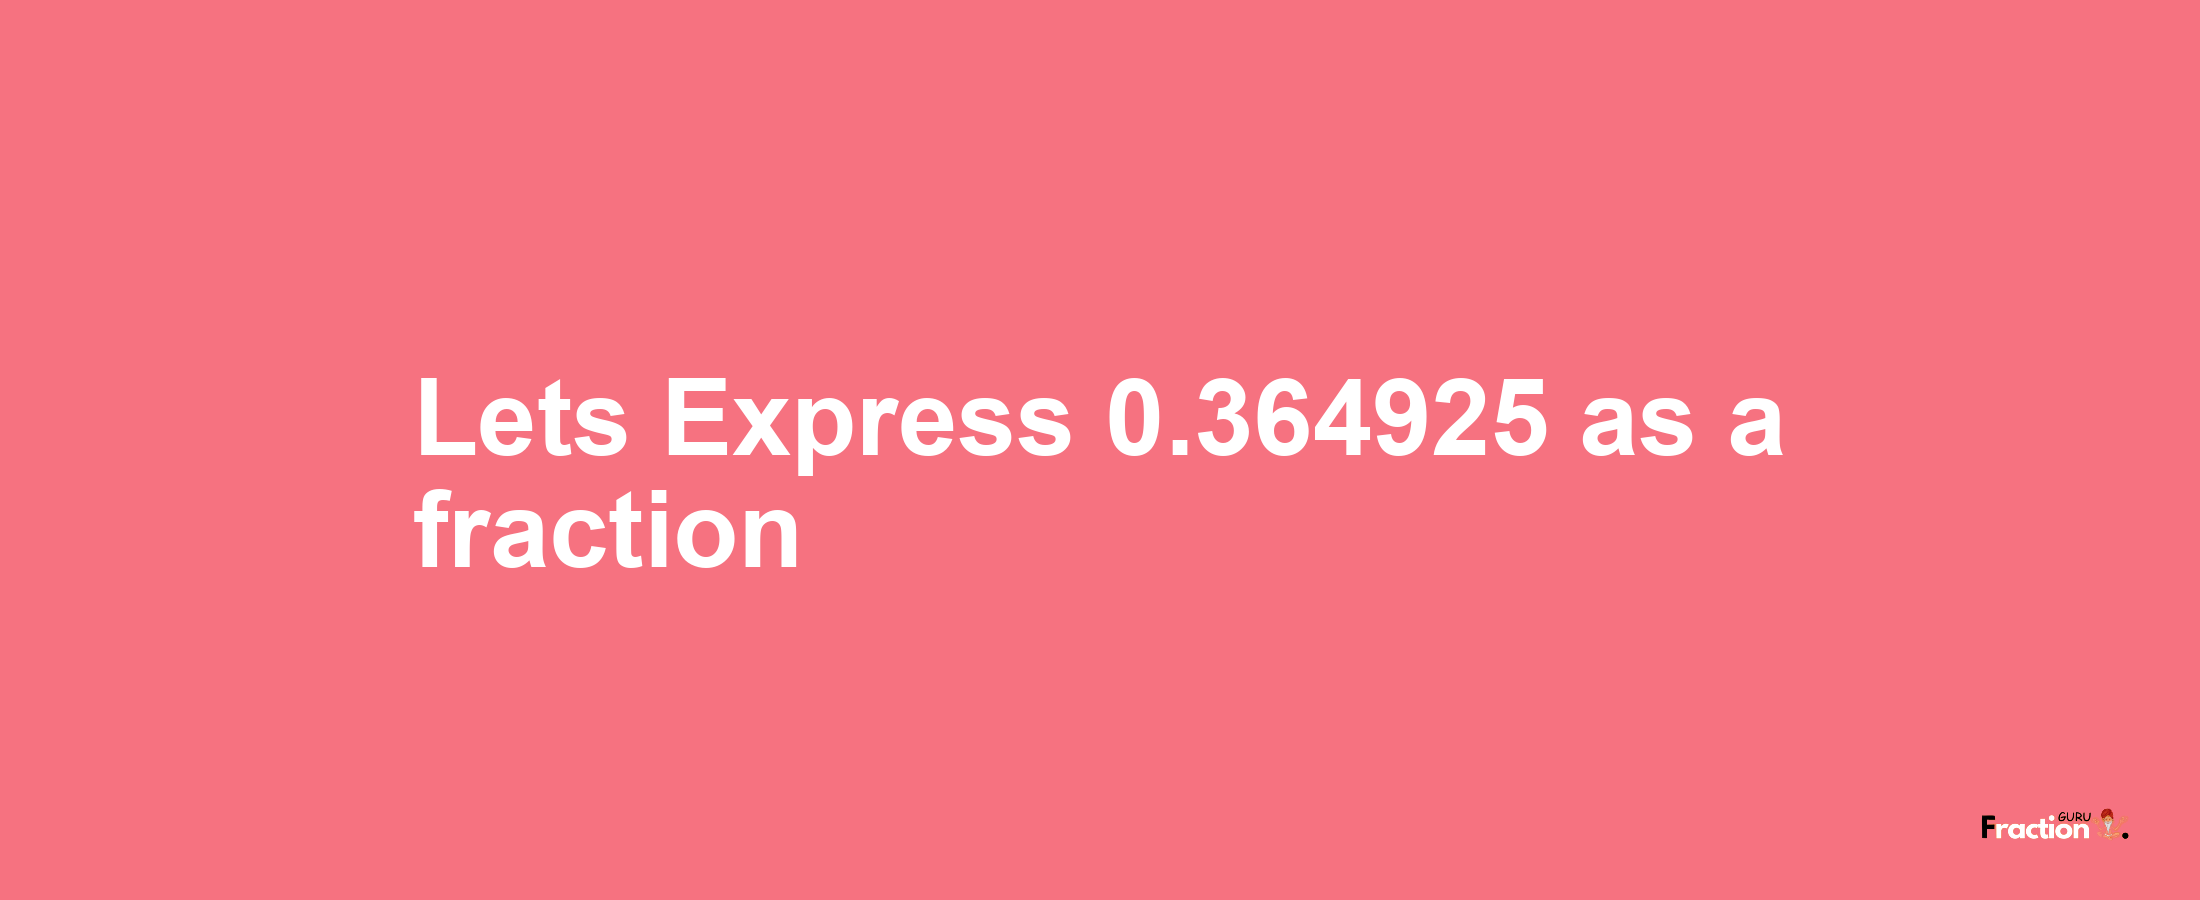 Lets Express 0.364925 as afraction